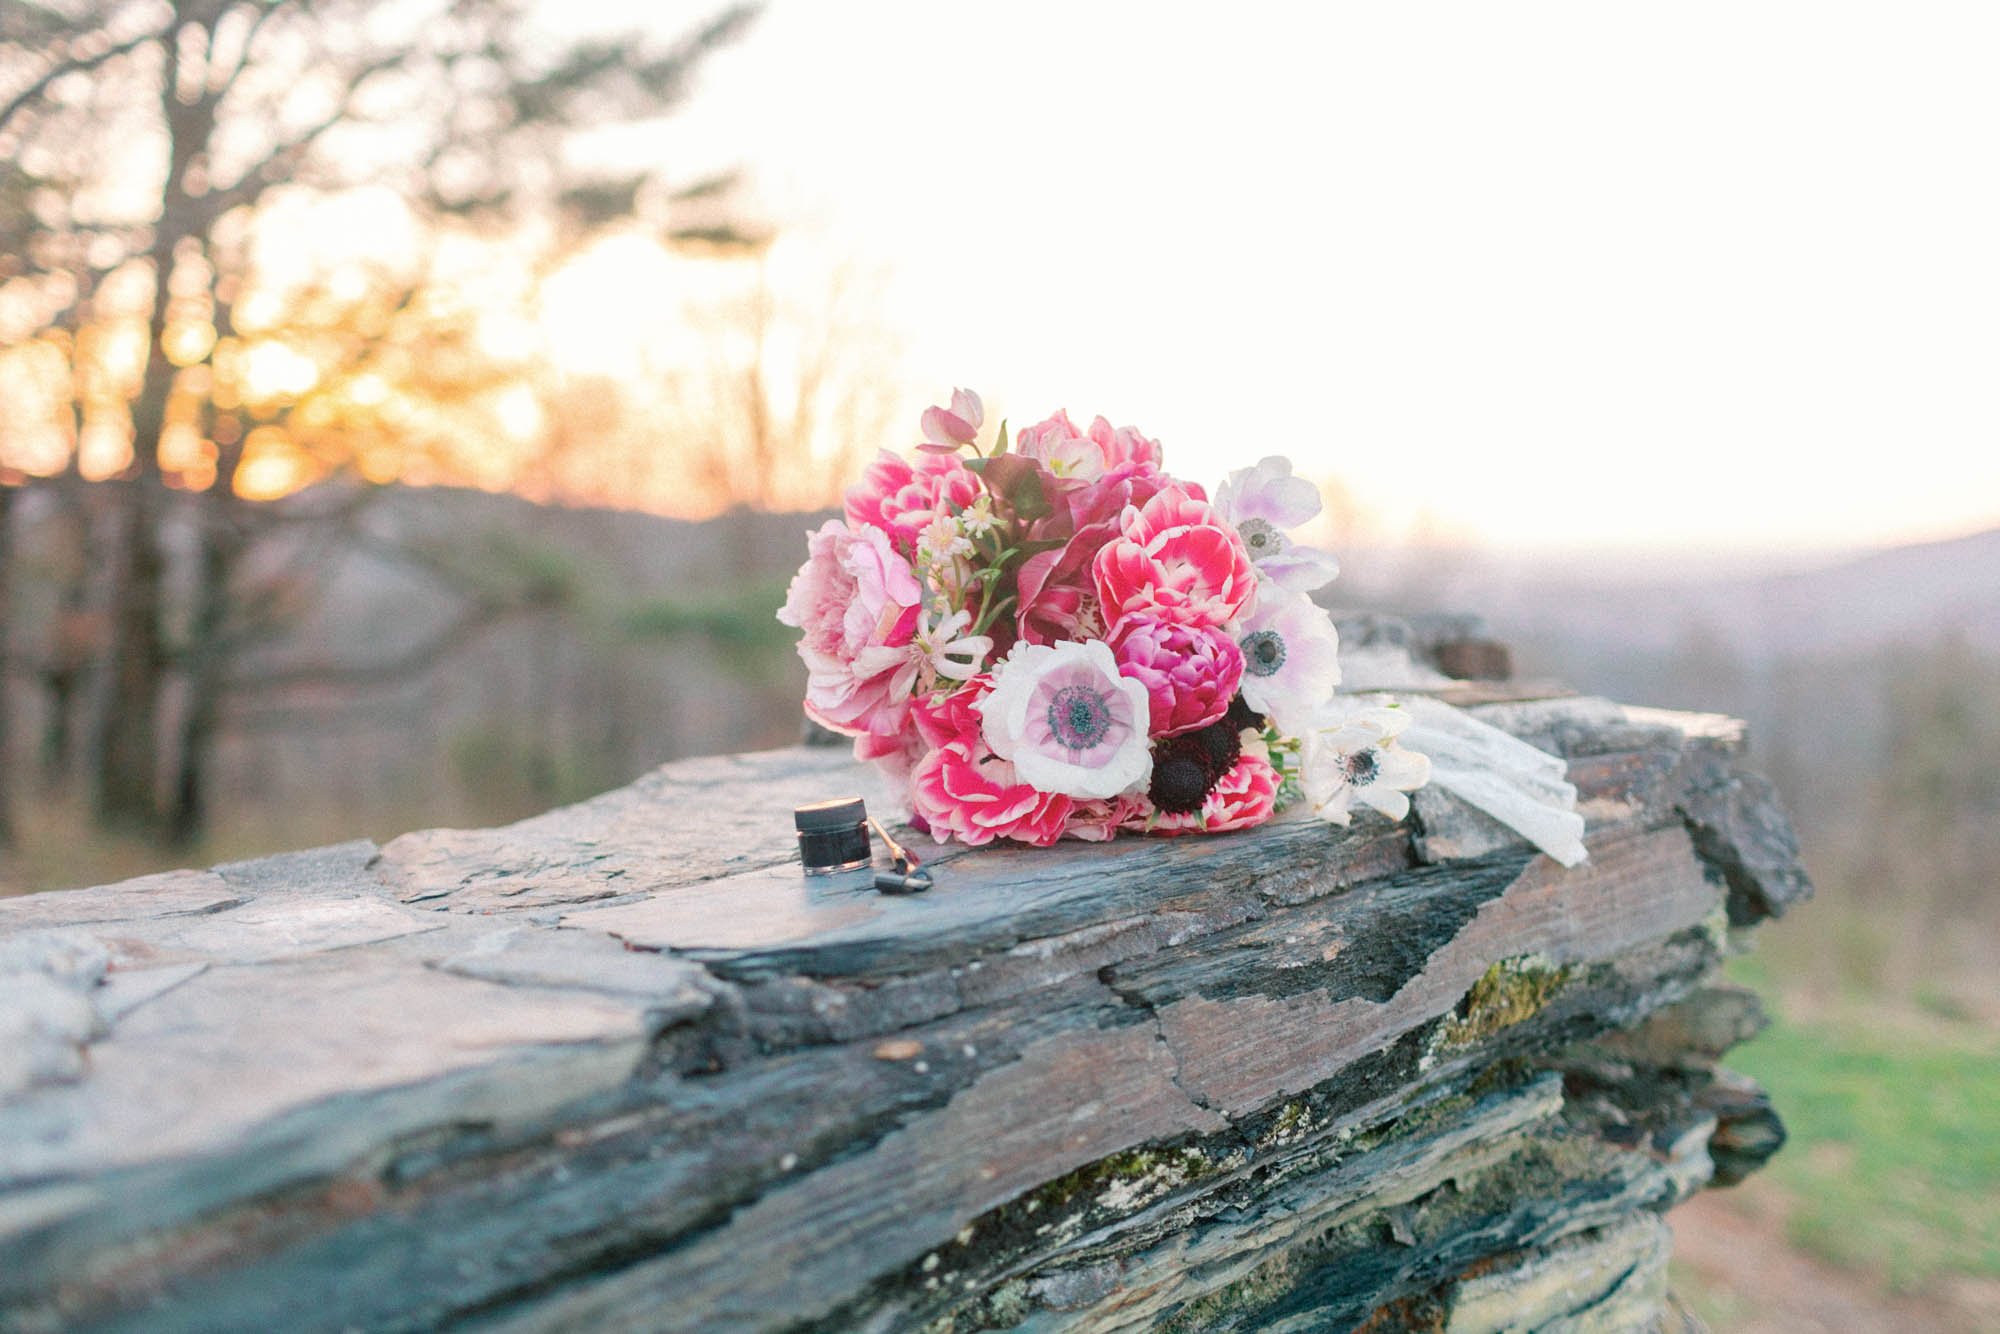 jessica-kovach-photography-inspiration-for-eloping-how-to-make-your-elopement-speical-and-unique-25.jpg